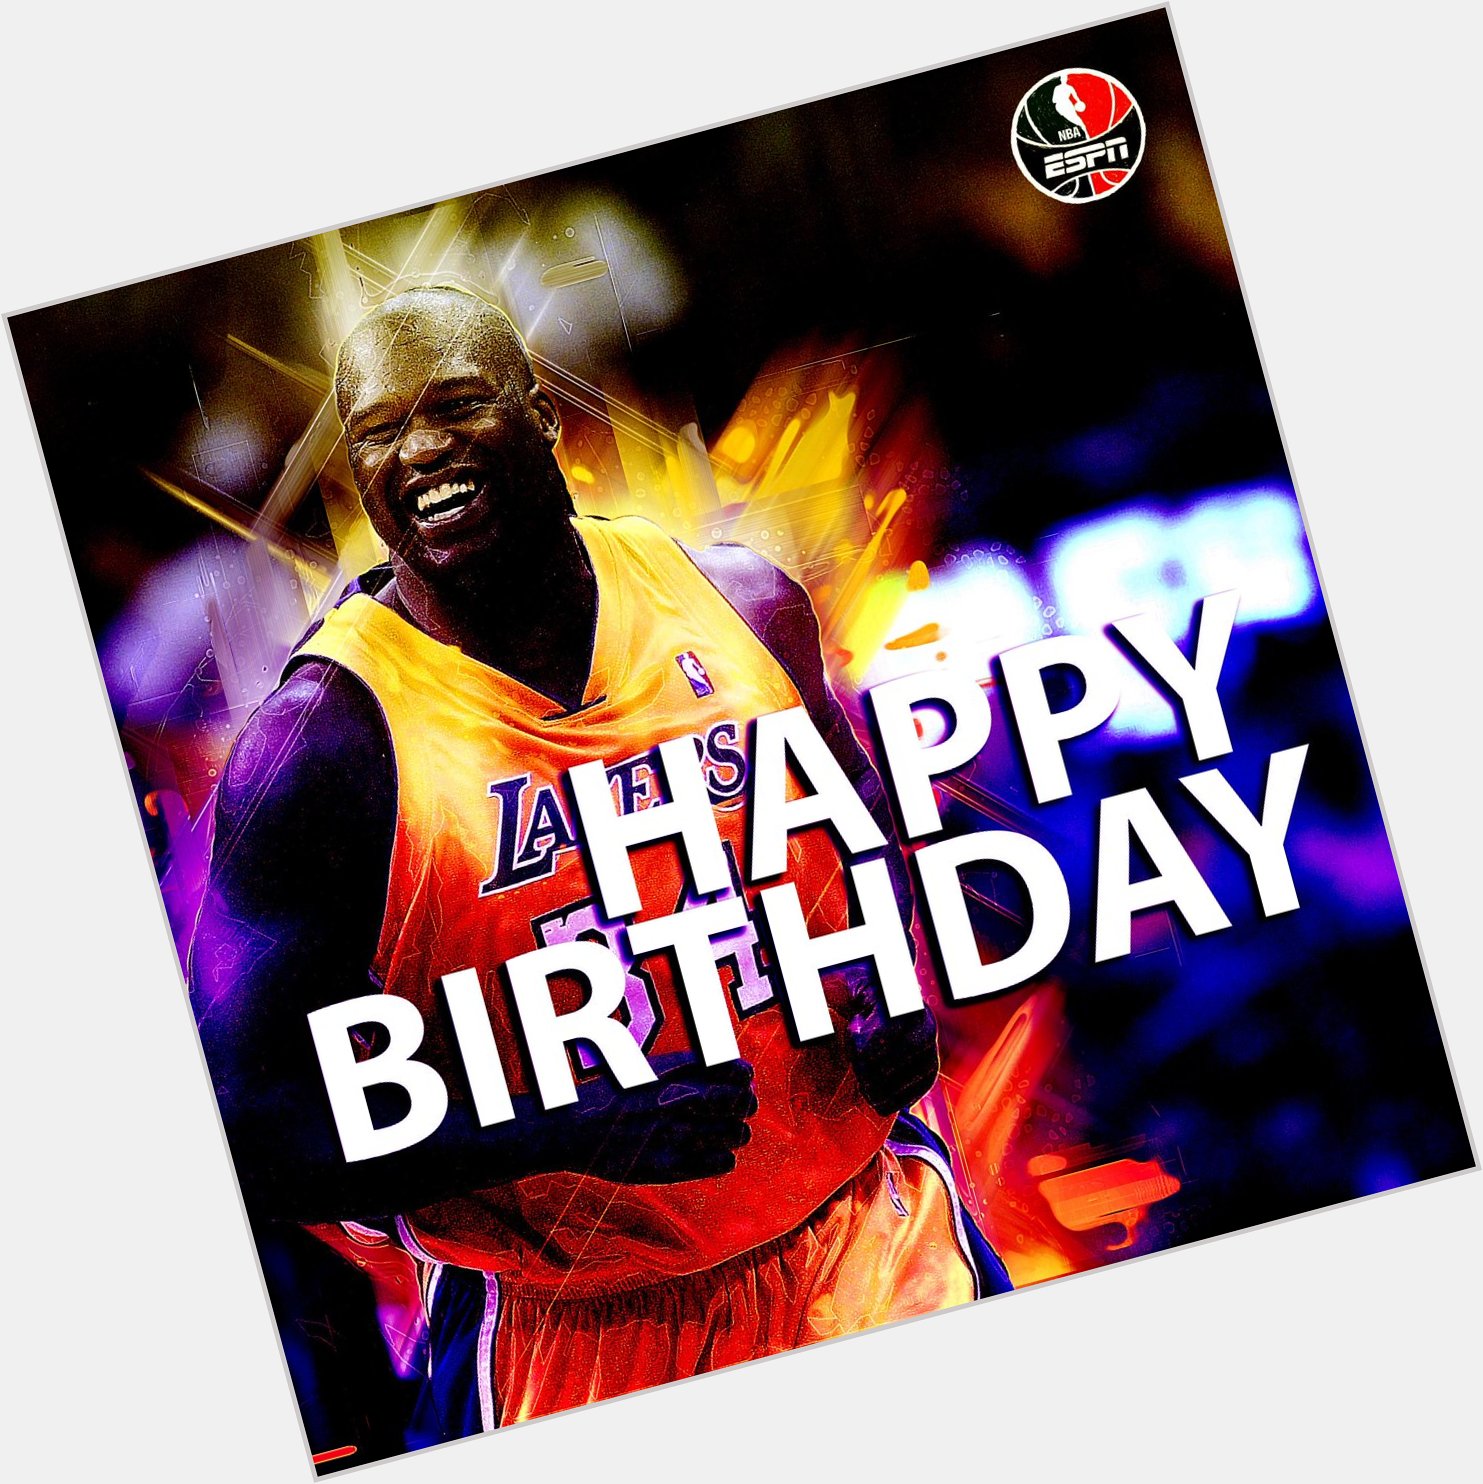   Help us send a BIG birthday shout out to the big fella Happy Birthday Shaquille O Neal!